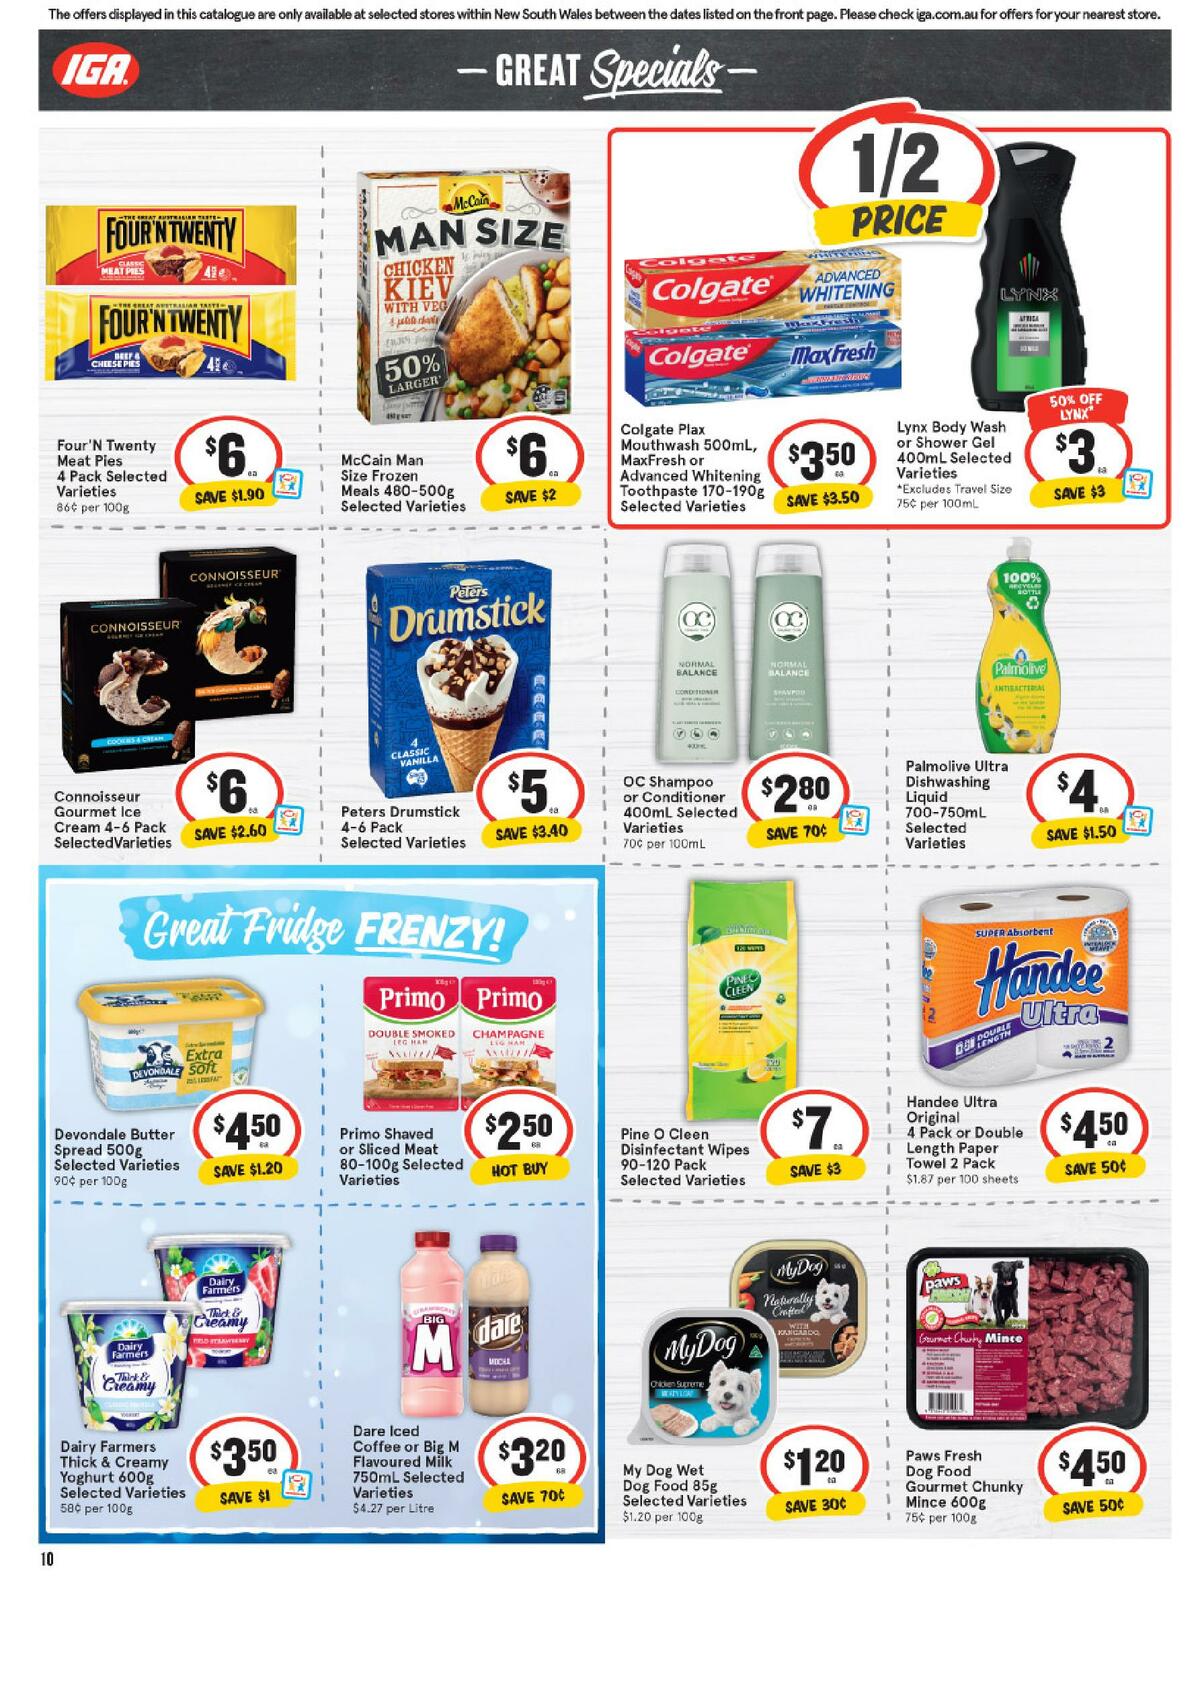 IGA Catalogues from 25 August